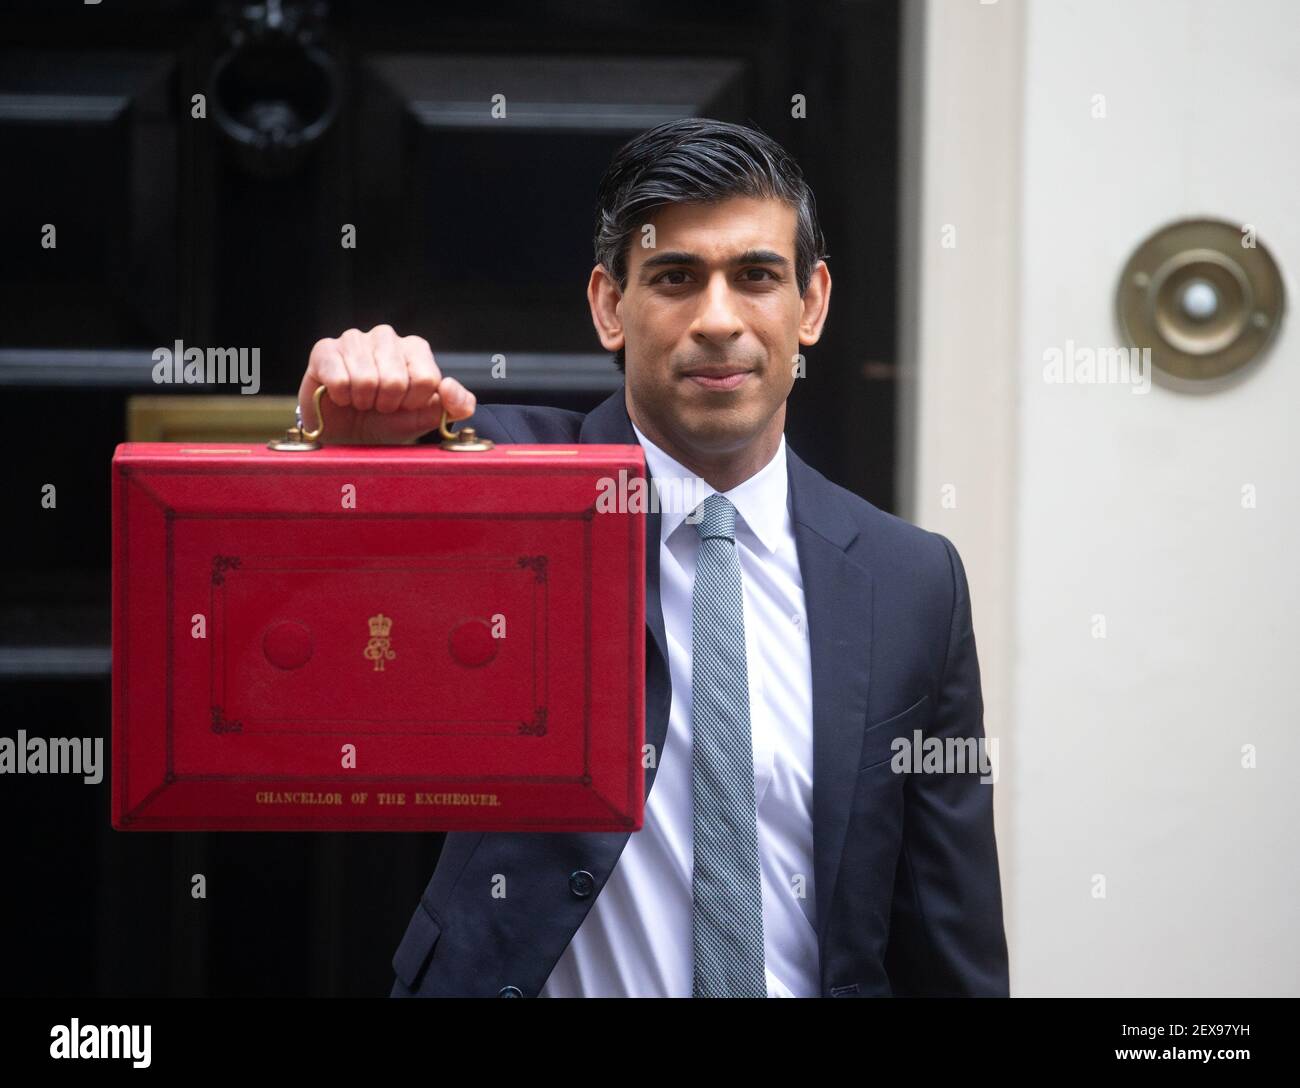 Chancellor of the Exchequer, Rishi Sunak, holds up the famous red briefcase,  Gladstone's Red box, before heading to Parliament to deliver his budget  Stock Photo - Alamy